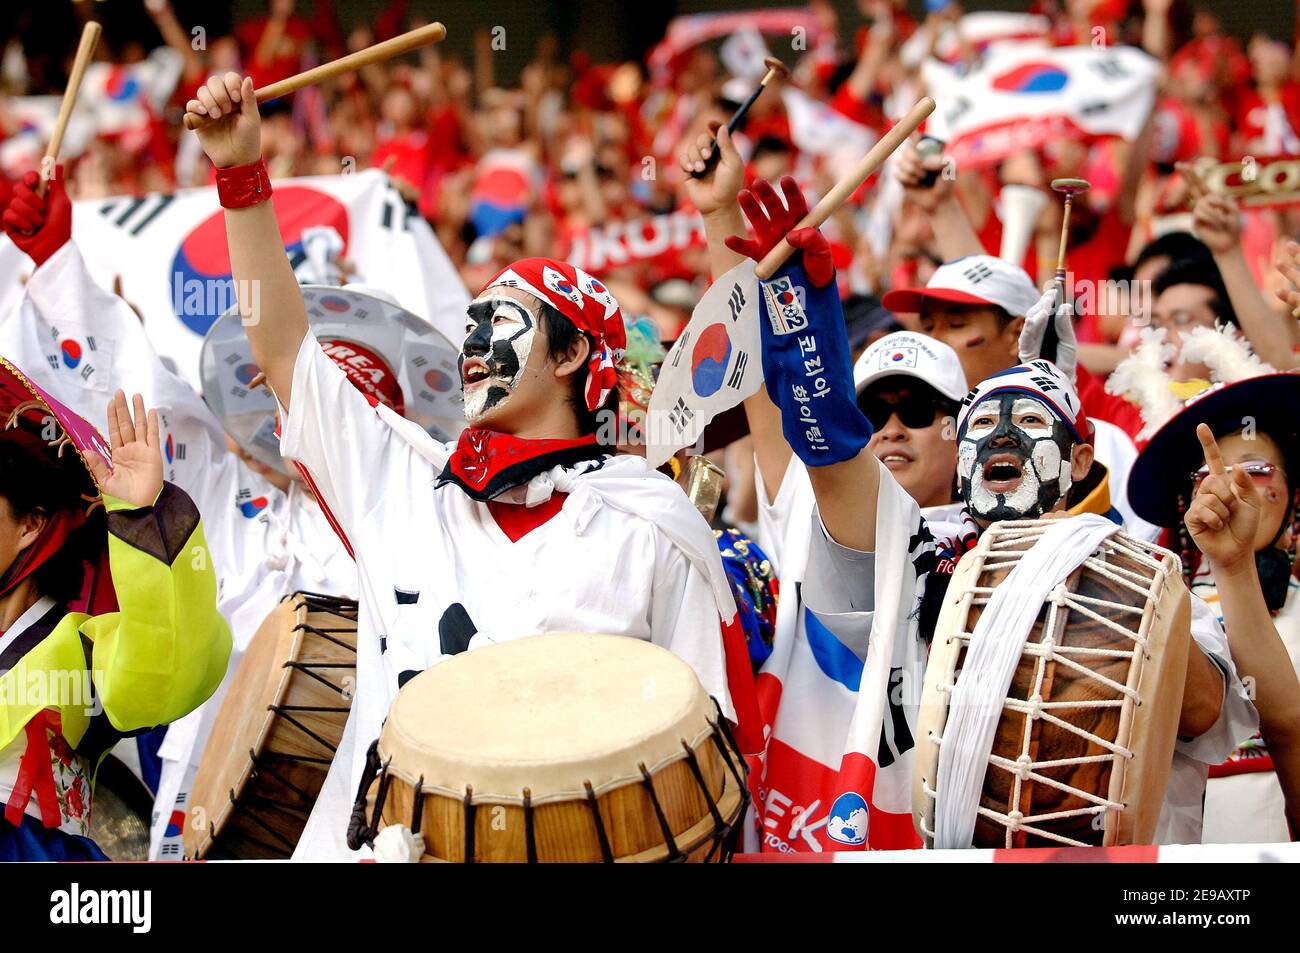 South Korea's fans during the World Cup 2006, Group G, France vs South Korea at the Zentralstadion stadium in Leipzig, Germany on June 18, 2006. The game ended in a draw 1-1. Photo by Gouhier-Hahn-Orban/Cameleon/ABACAPRESS.COM Stock Photo